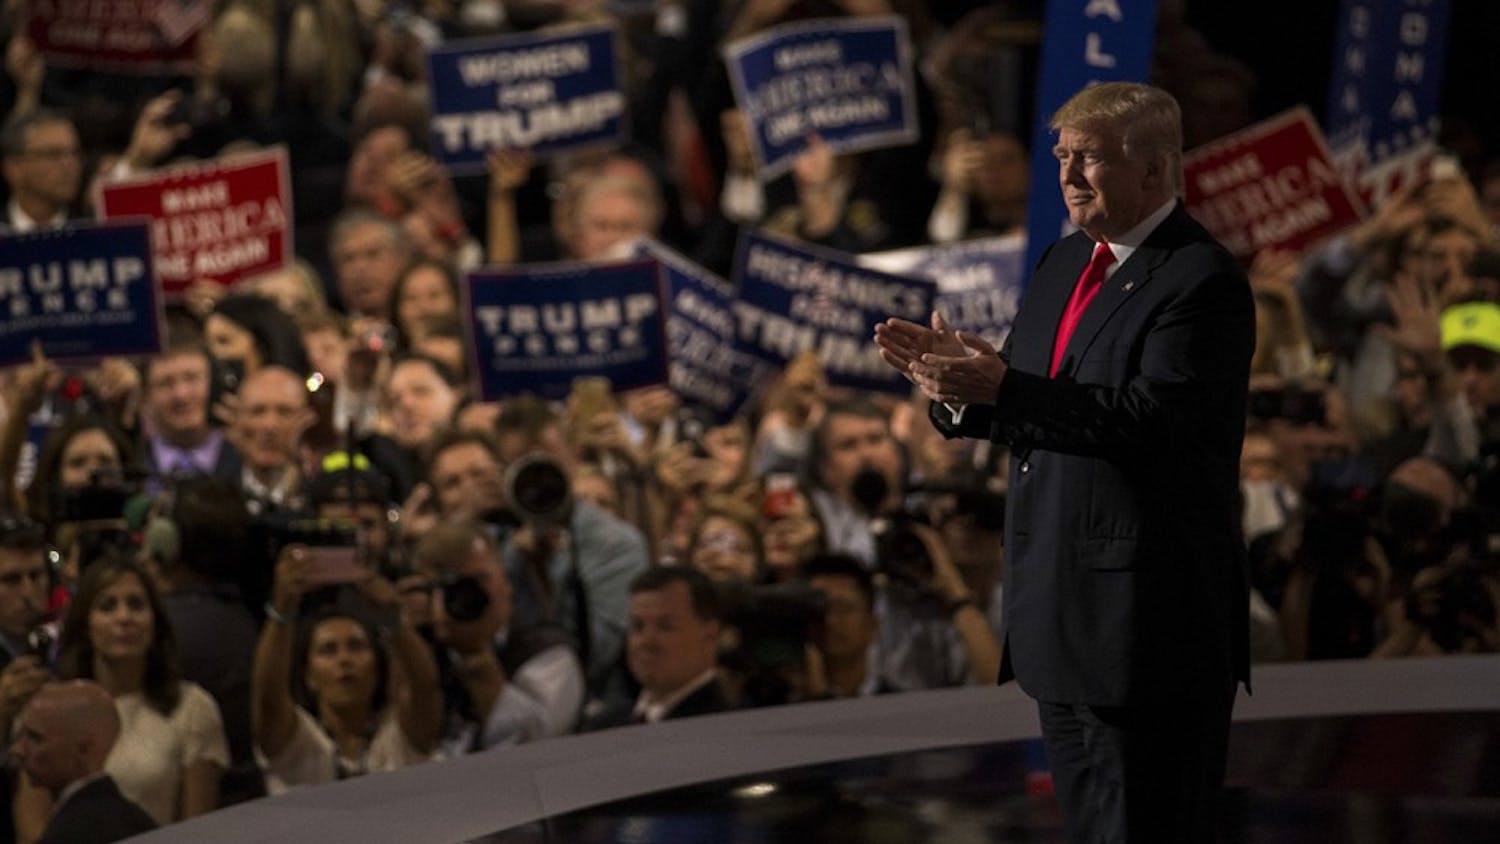 Republican presidential nominee Donald Trump claps with the audience shortly after walking on stage Thursday night at the Quicken Loans Arena in Cleveland, Ohio to accept the nomination of the Republican Party for president of the United States.